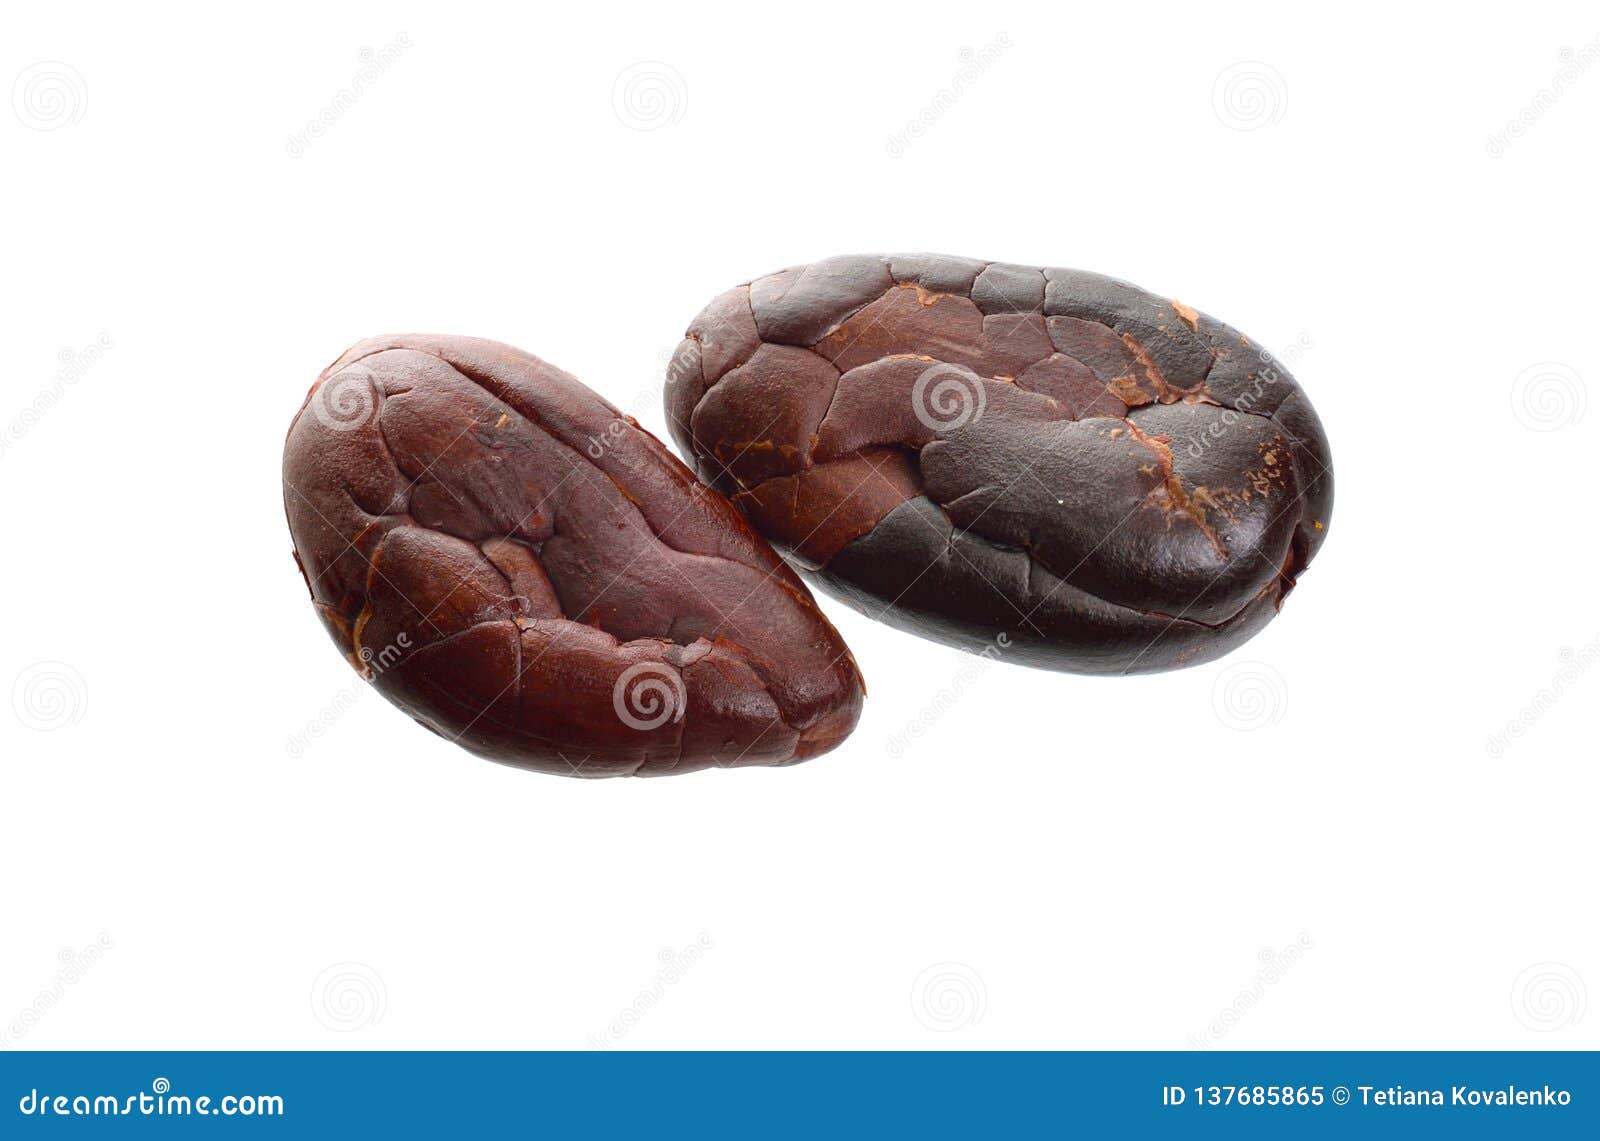 roasted cocoa beans  on white background. full dept of field